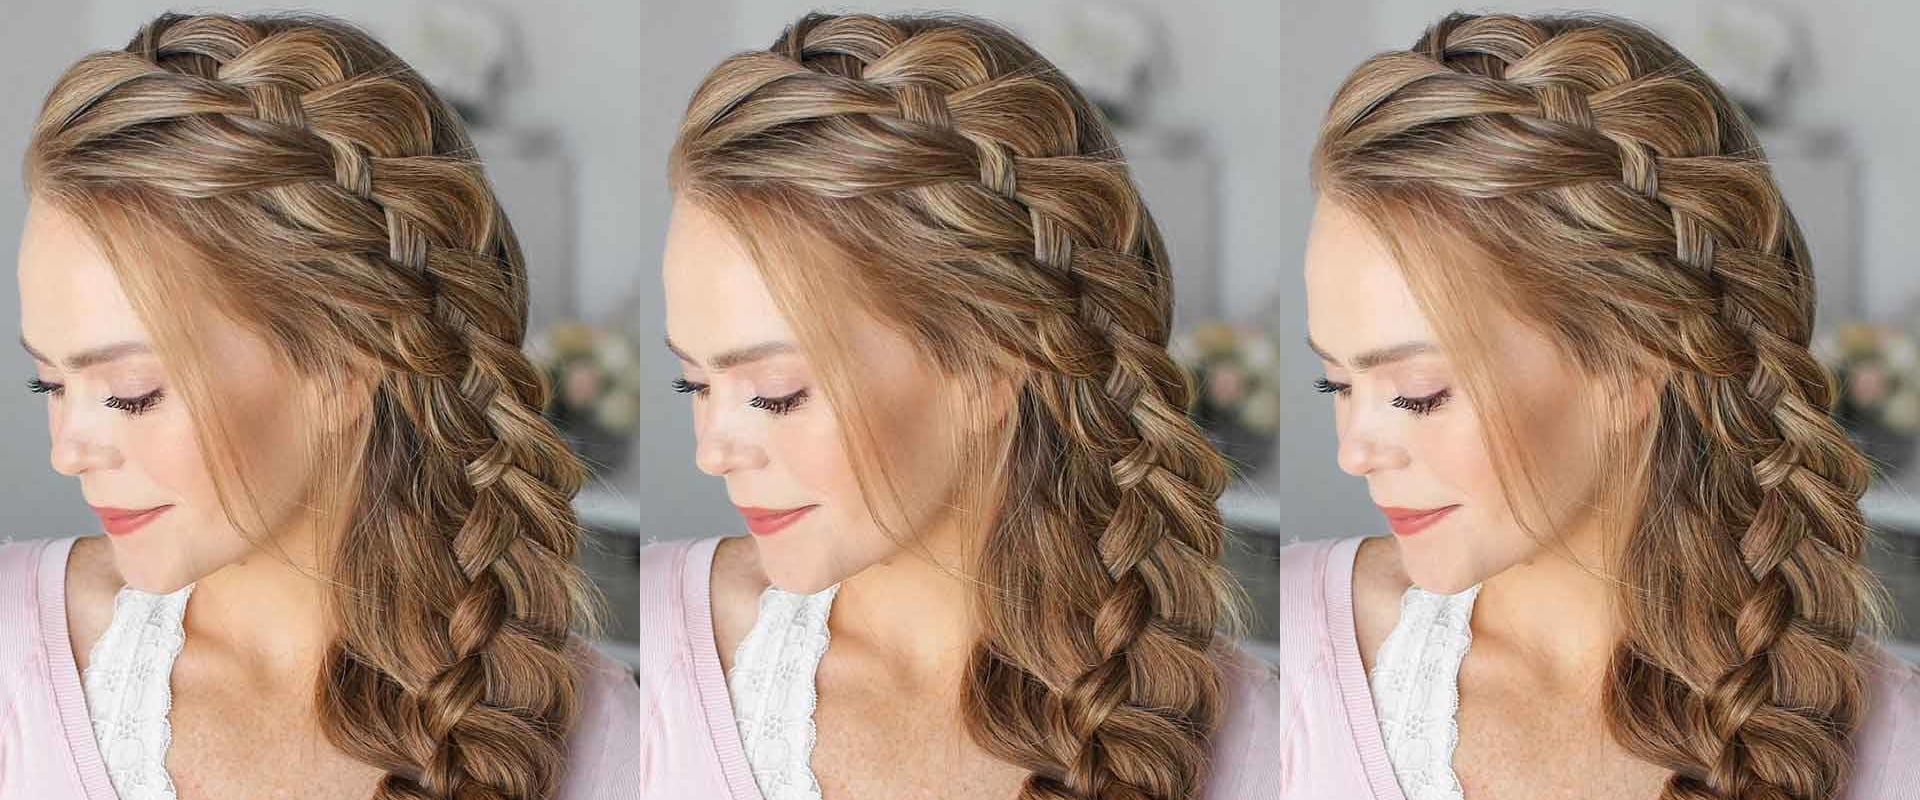 Styling Techniques: Braid Styles for Women's Hair